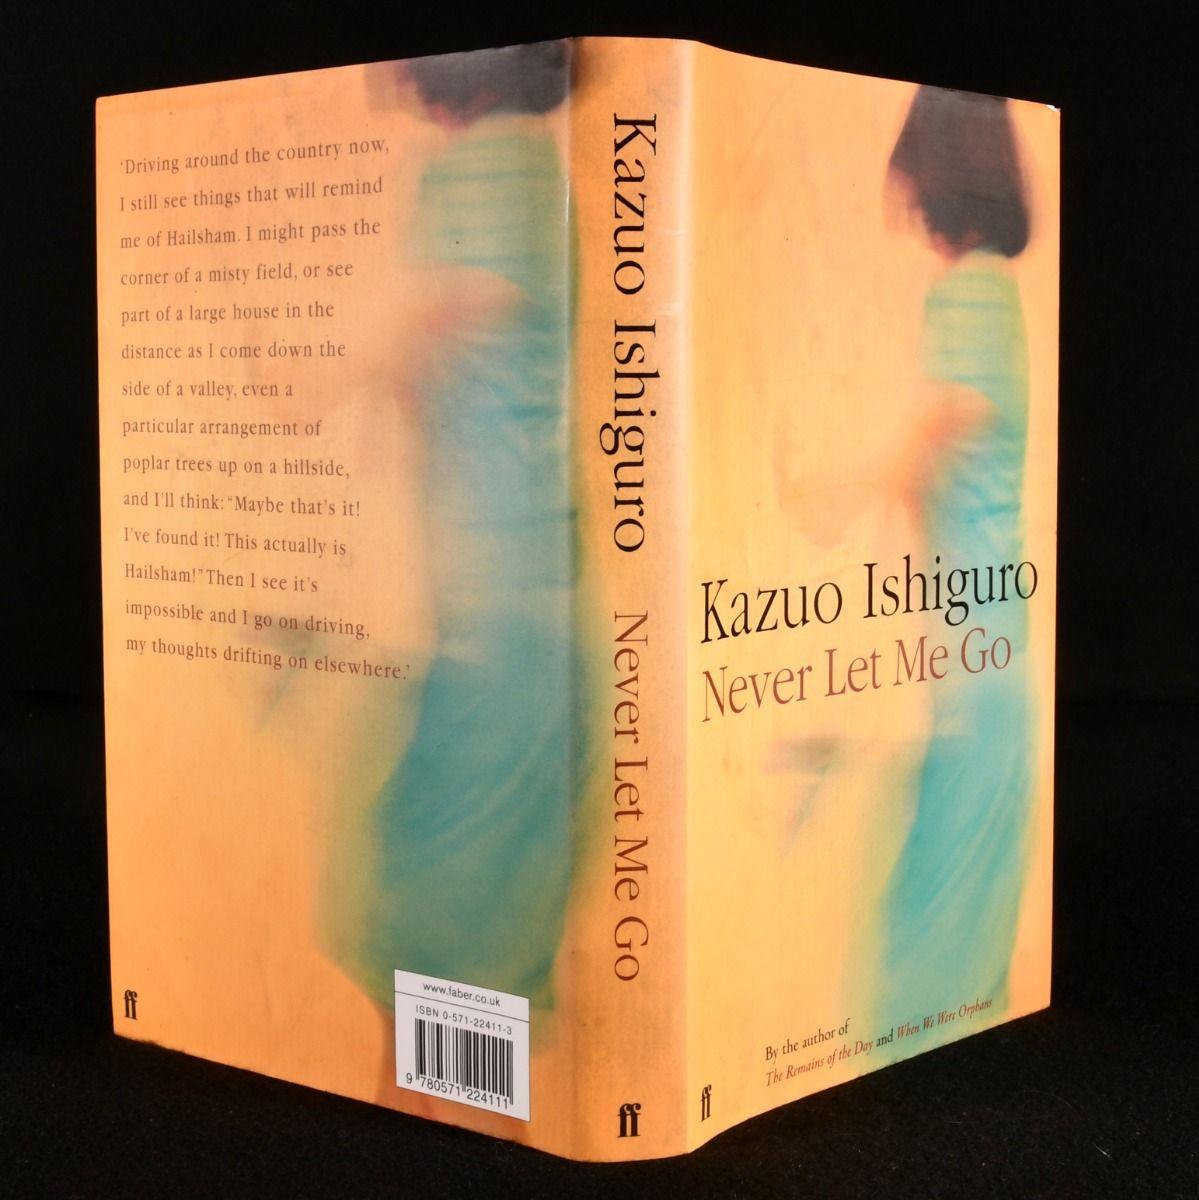 A signed first edition of Kazuo Ishiguro's award winning work of speculative science fiction. A lovely copy of this important work.

The signed first edition, first impression of this immensely successful novel from Nobel Prize for Literature